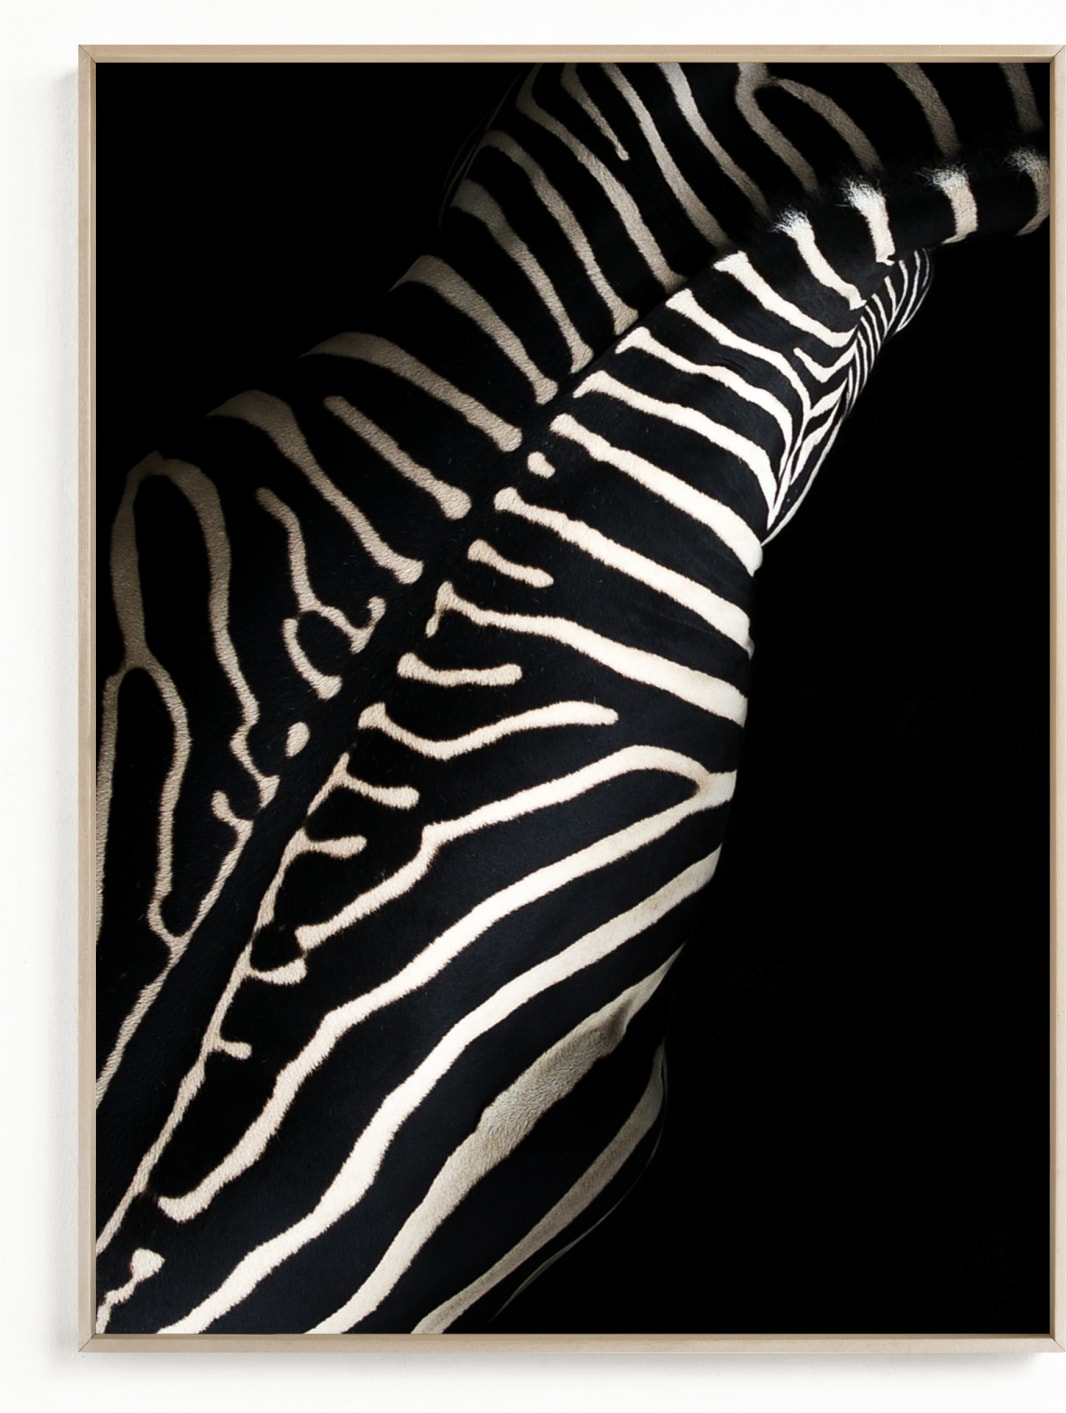 This is a ivory art by David Michuki called Night Stripes.